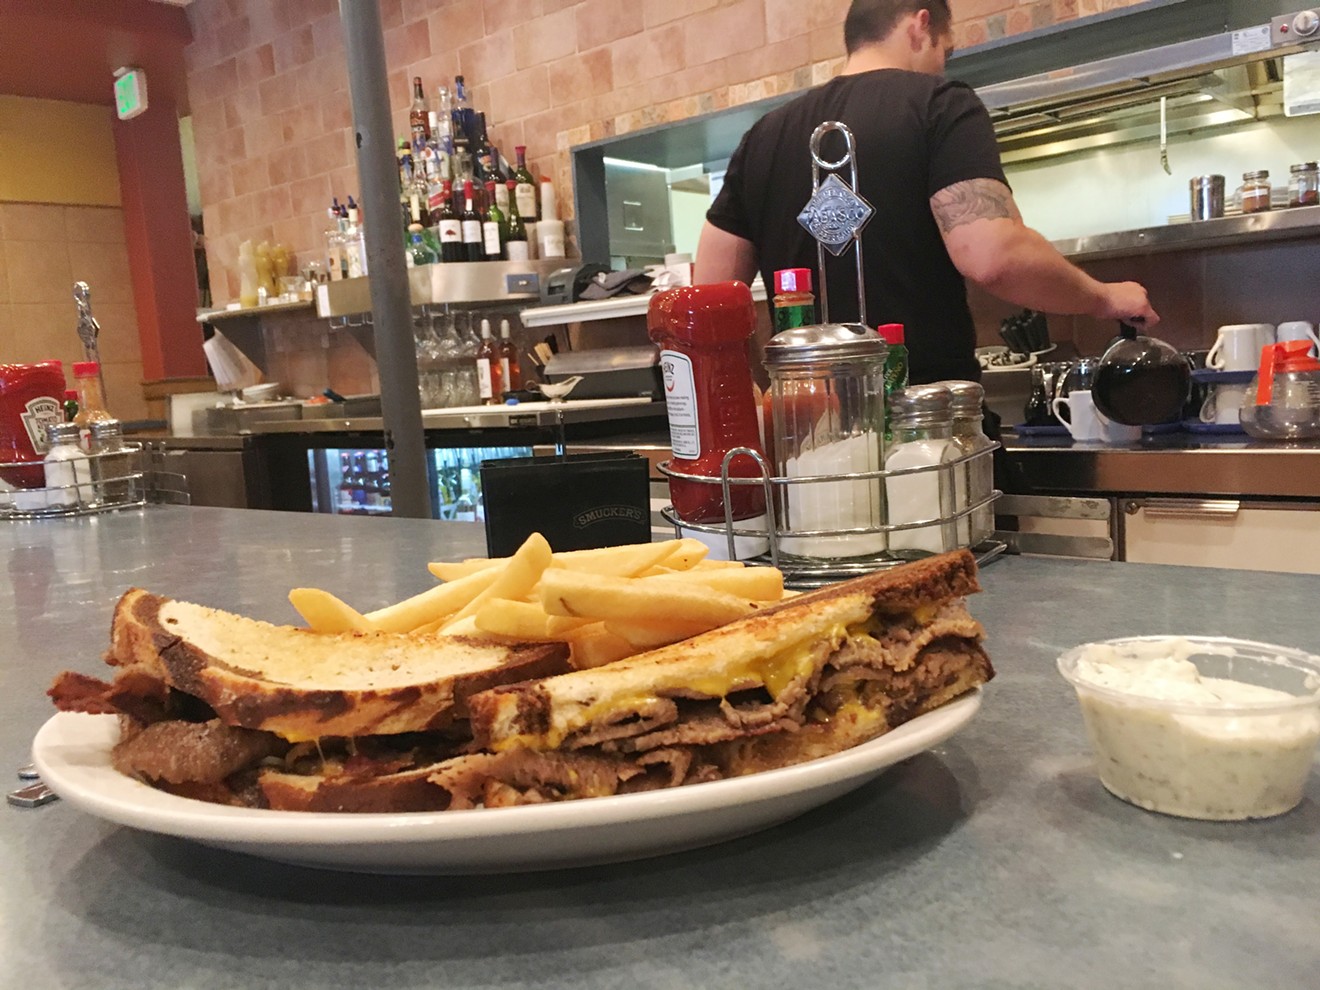 Diner classics like this gyros melt (with a side of tzatziki for the fries) can be found at Chef Zorba's.